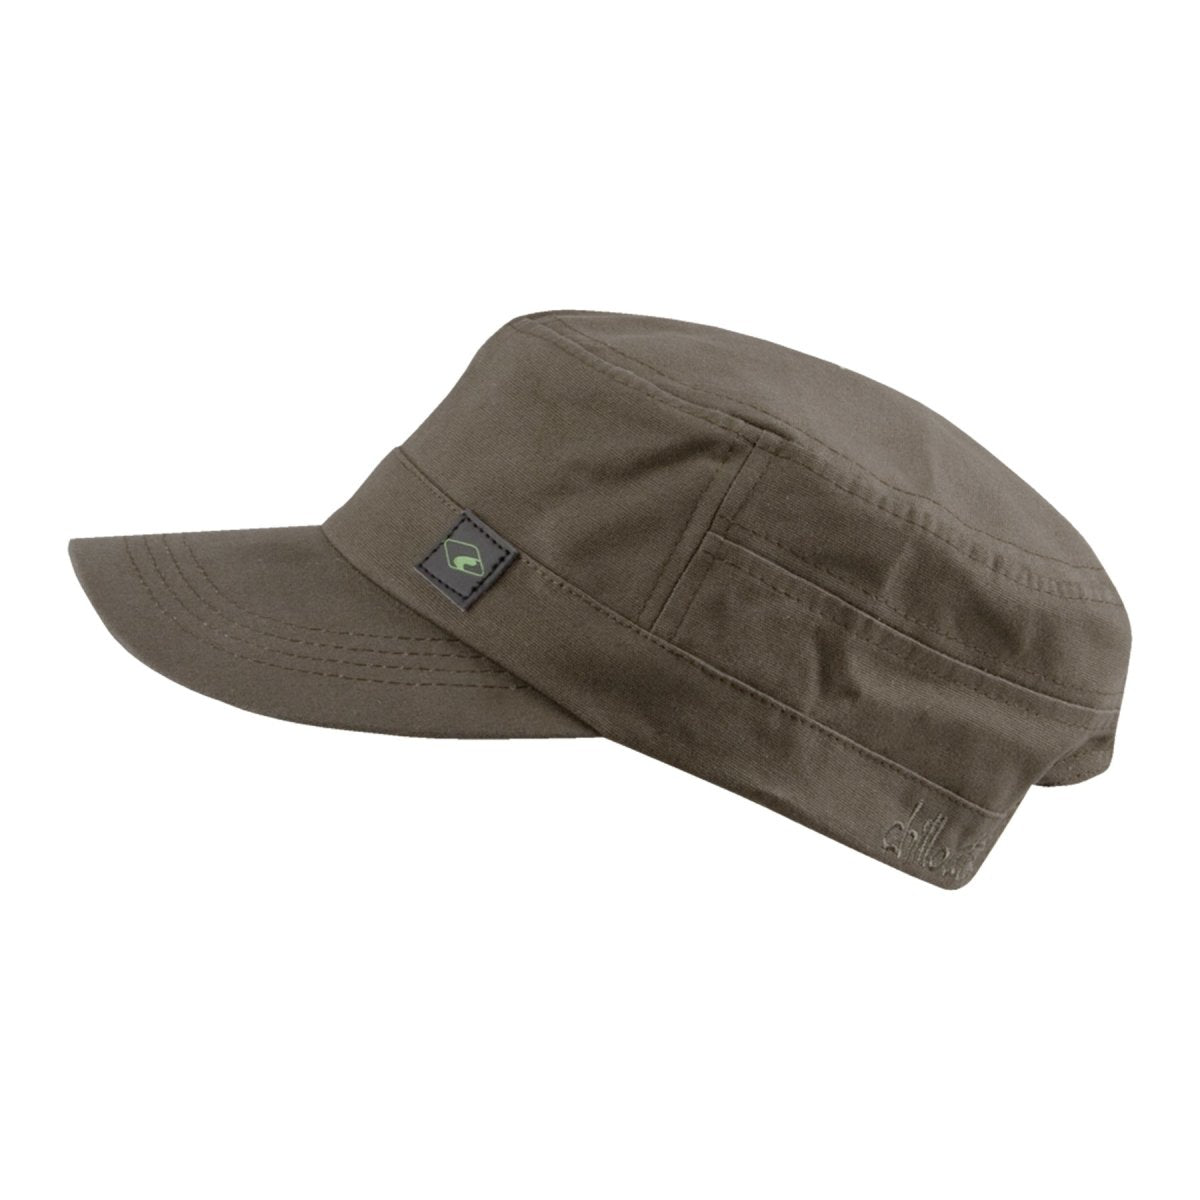 in online now! Military cap made buy - colors cotton natural – Chillouts of Headwear